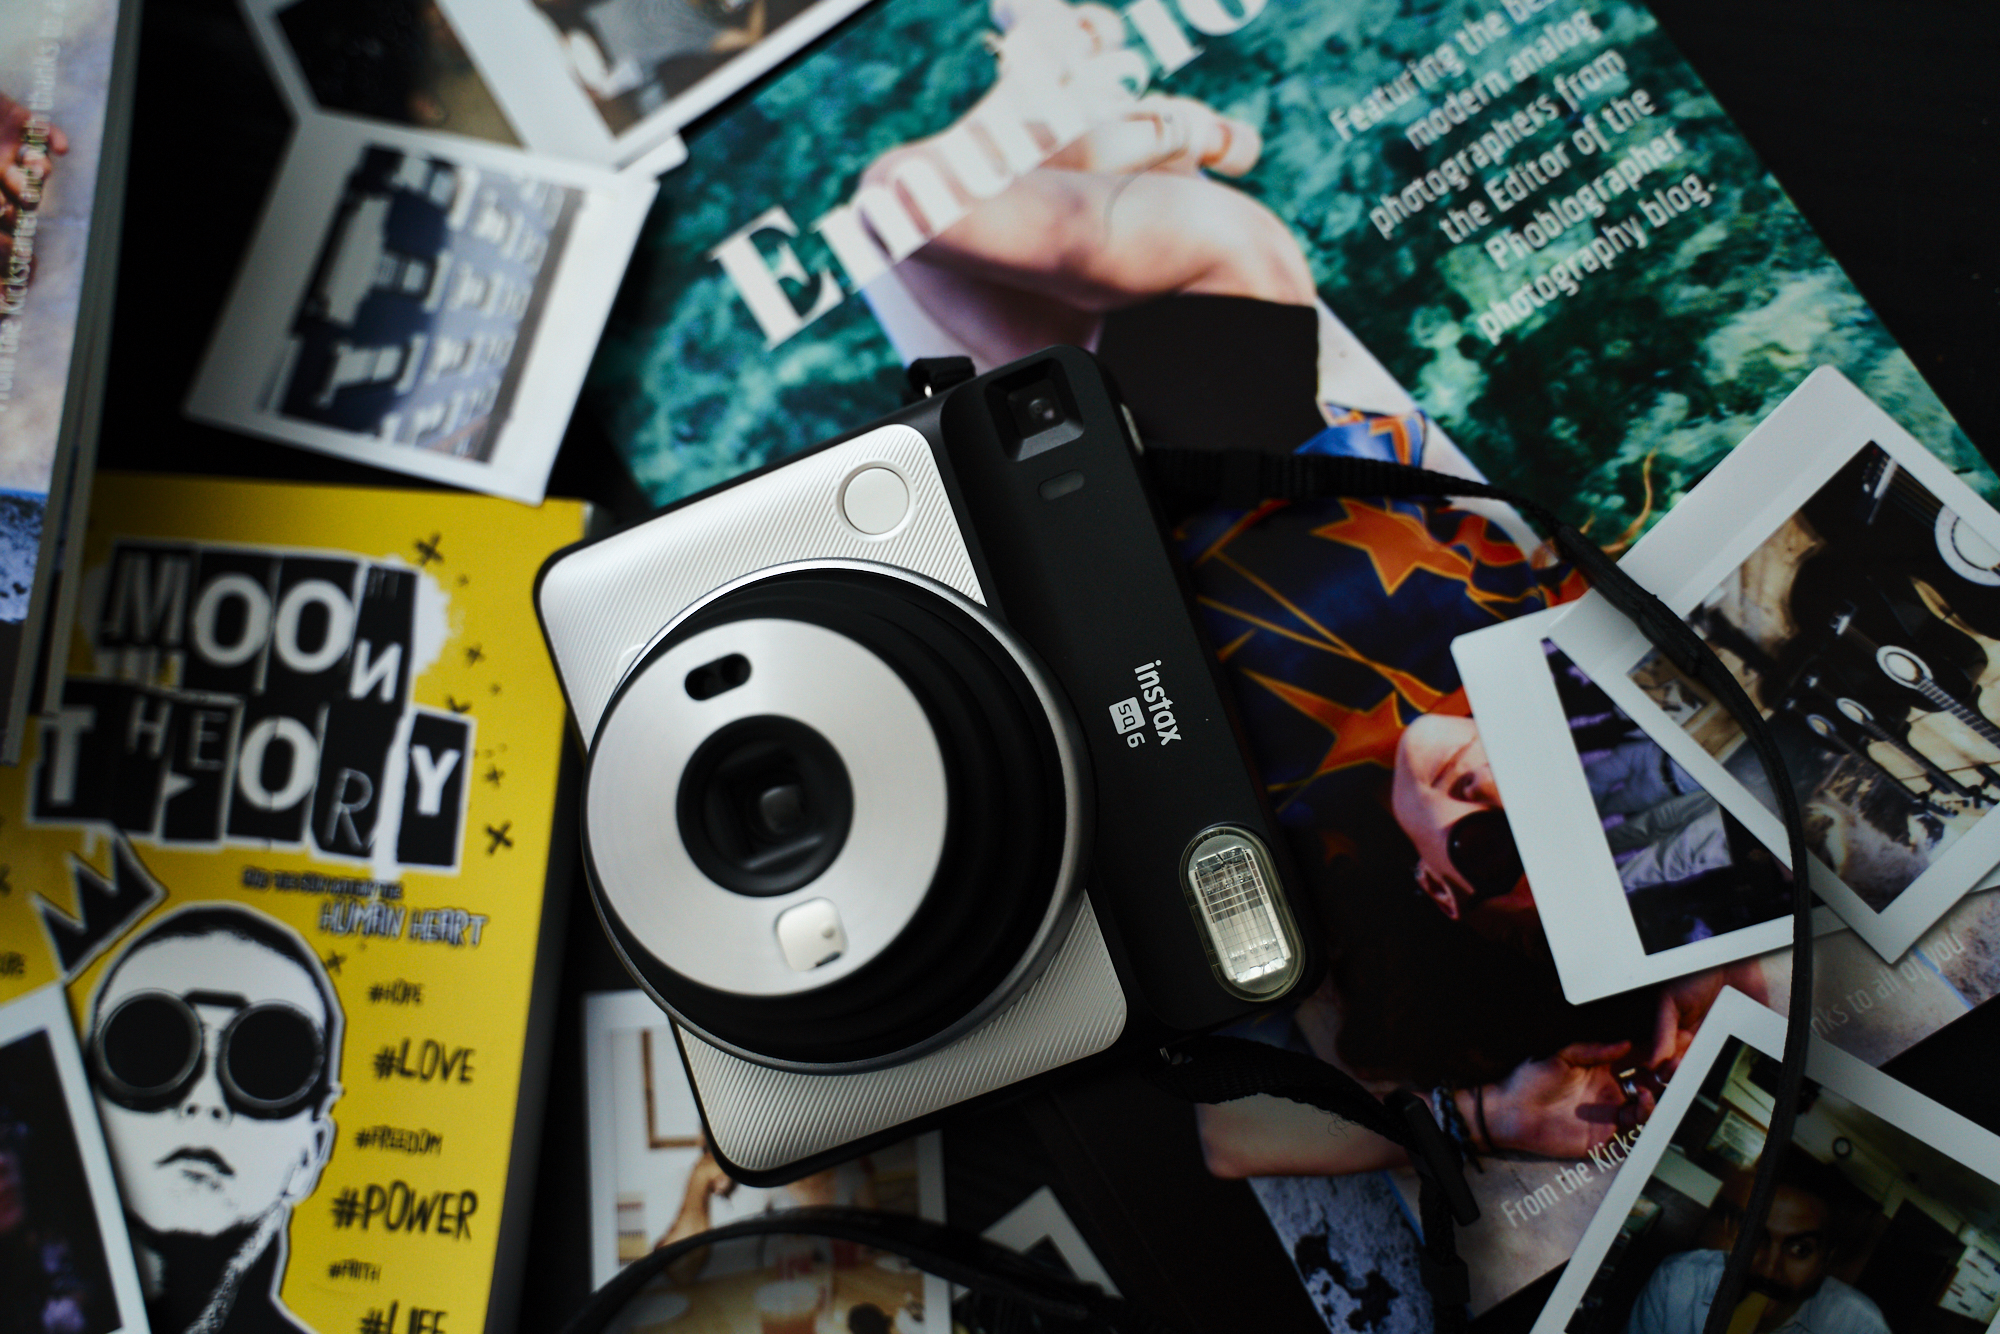 Fujifilm Instax SQ6 pros and cons after 6 months - Jamaican in Japan